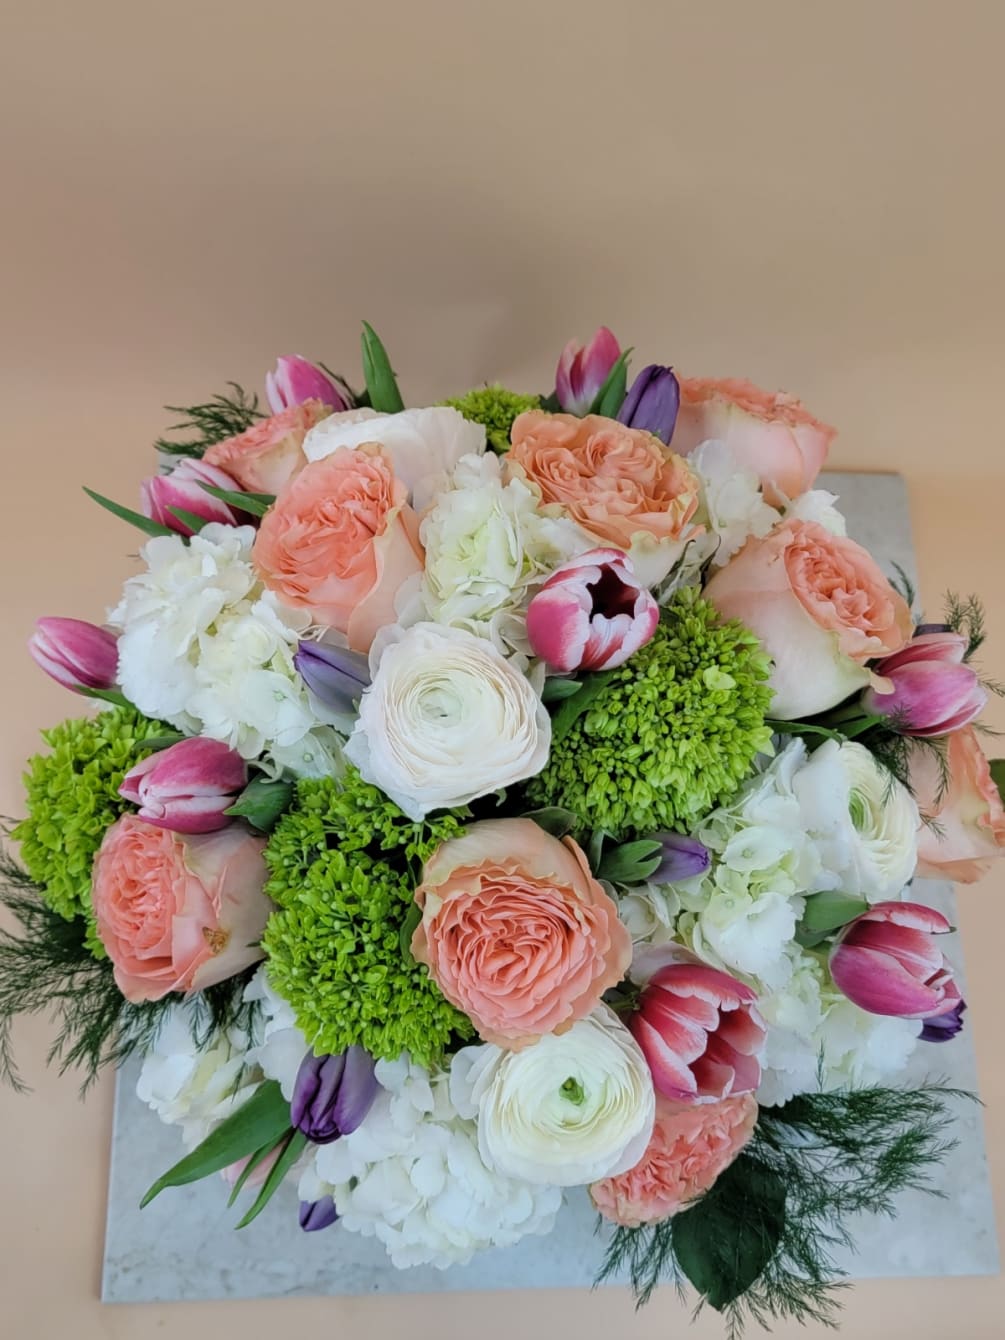 Beautifully arranged roses, ranunculus, tulips and hydrangea in a assortment of colors